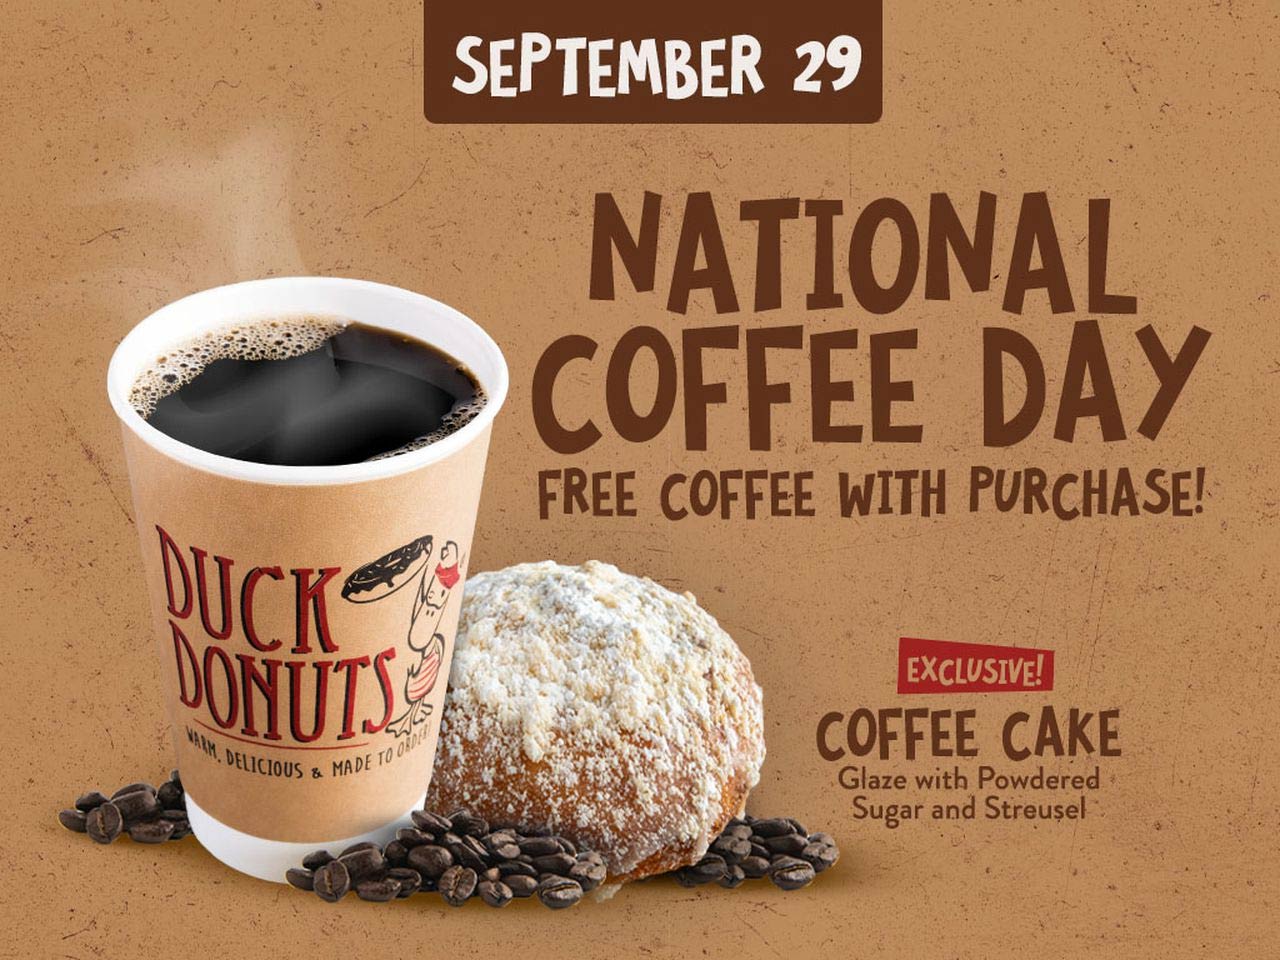 Duck Donuts restaurants Coupon  Free coffee with any purchase today at Duck Donuts #duckdonuts 